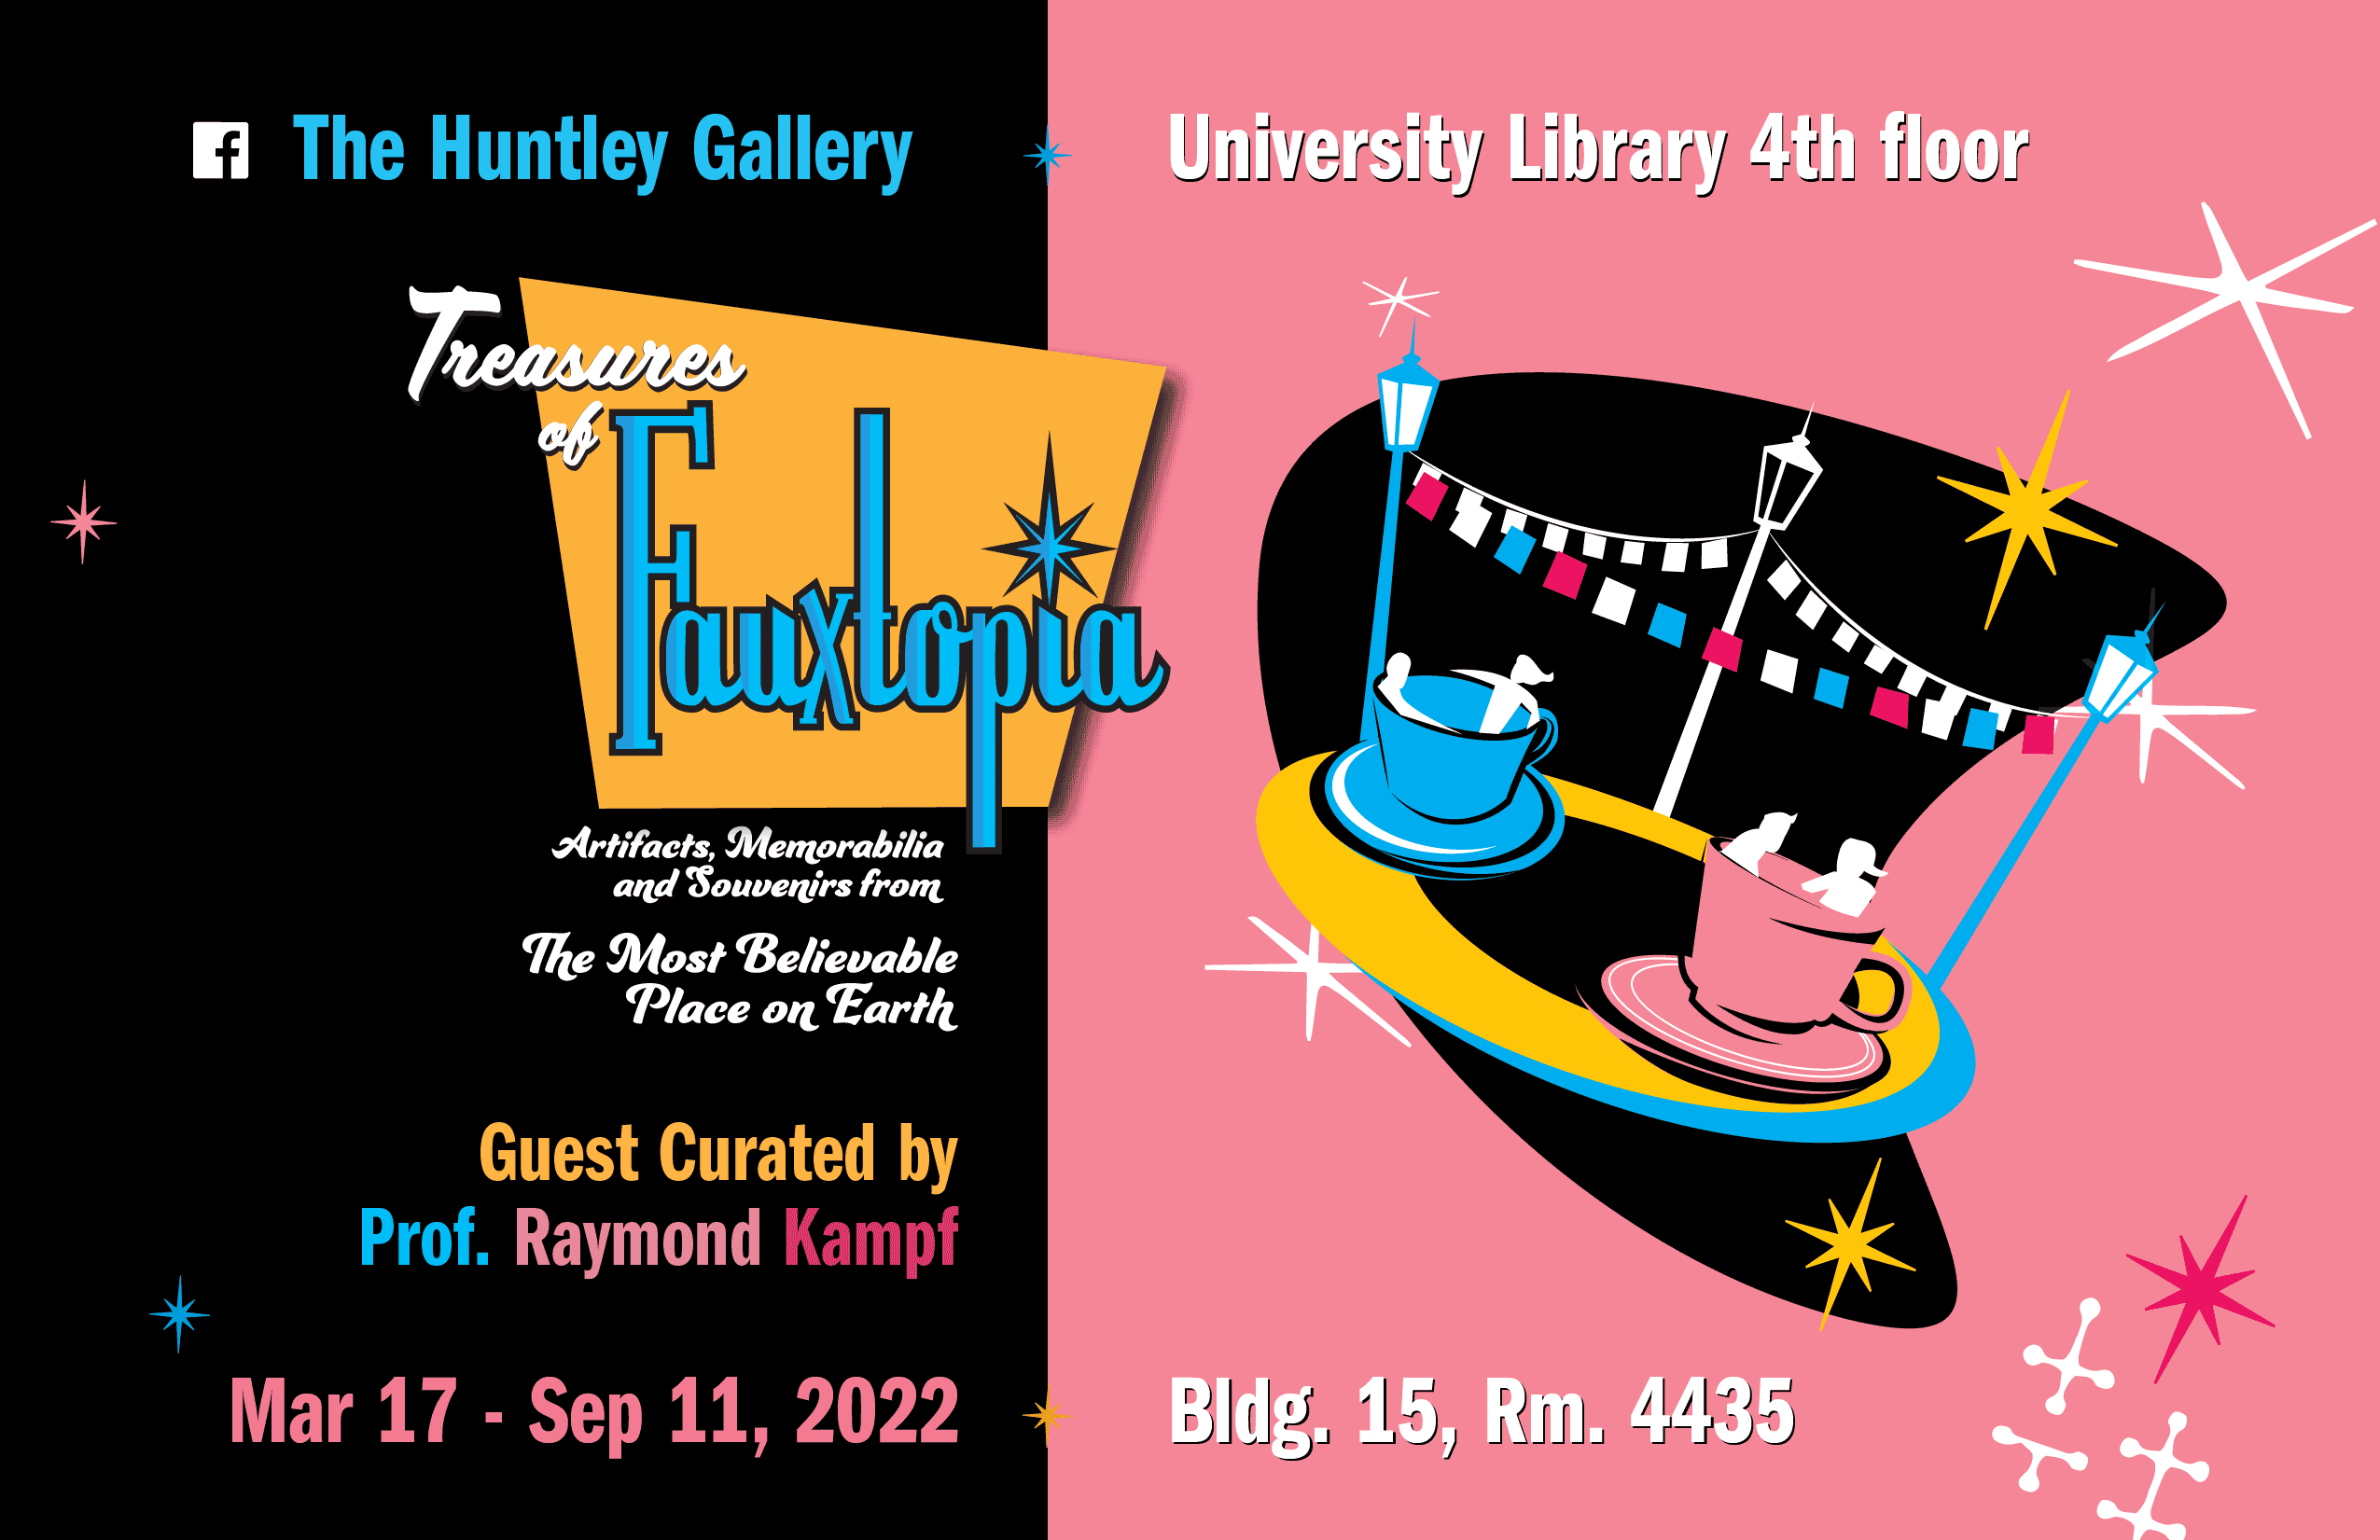 Get ready for Treasures of Fauxtopia Artifacts, Memorabilia and Souvenirs from The Most Believable Place on Earth at the Don B. Huntley Gallery located on the 4th floor of University Library exhibiting from Thursday, March 17 - Sunday, September 11! 